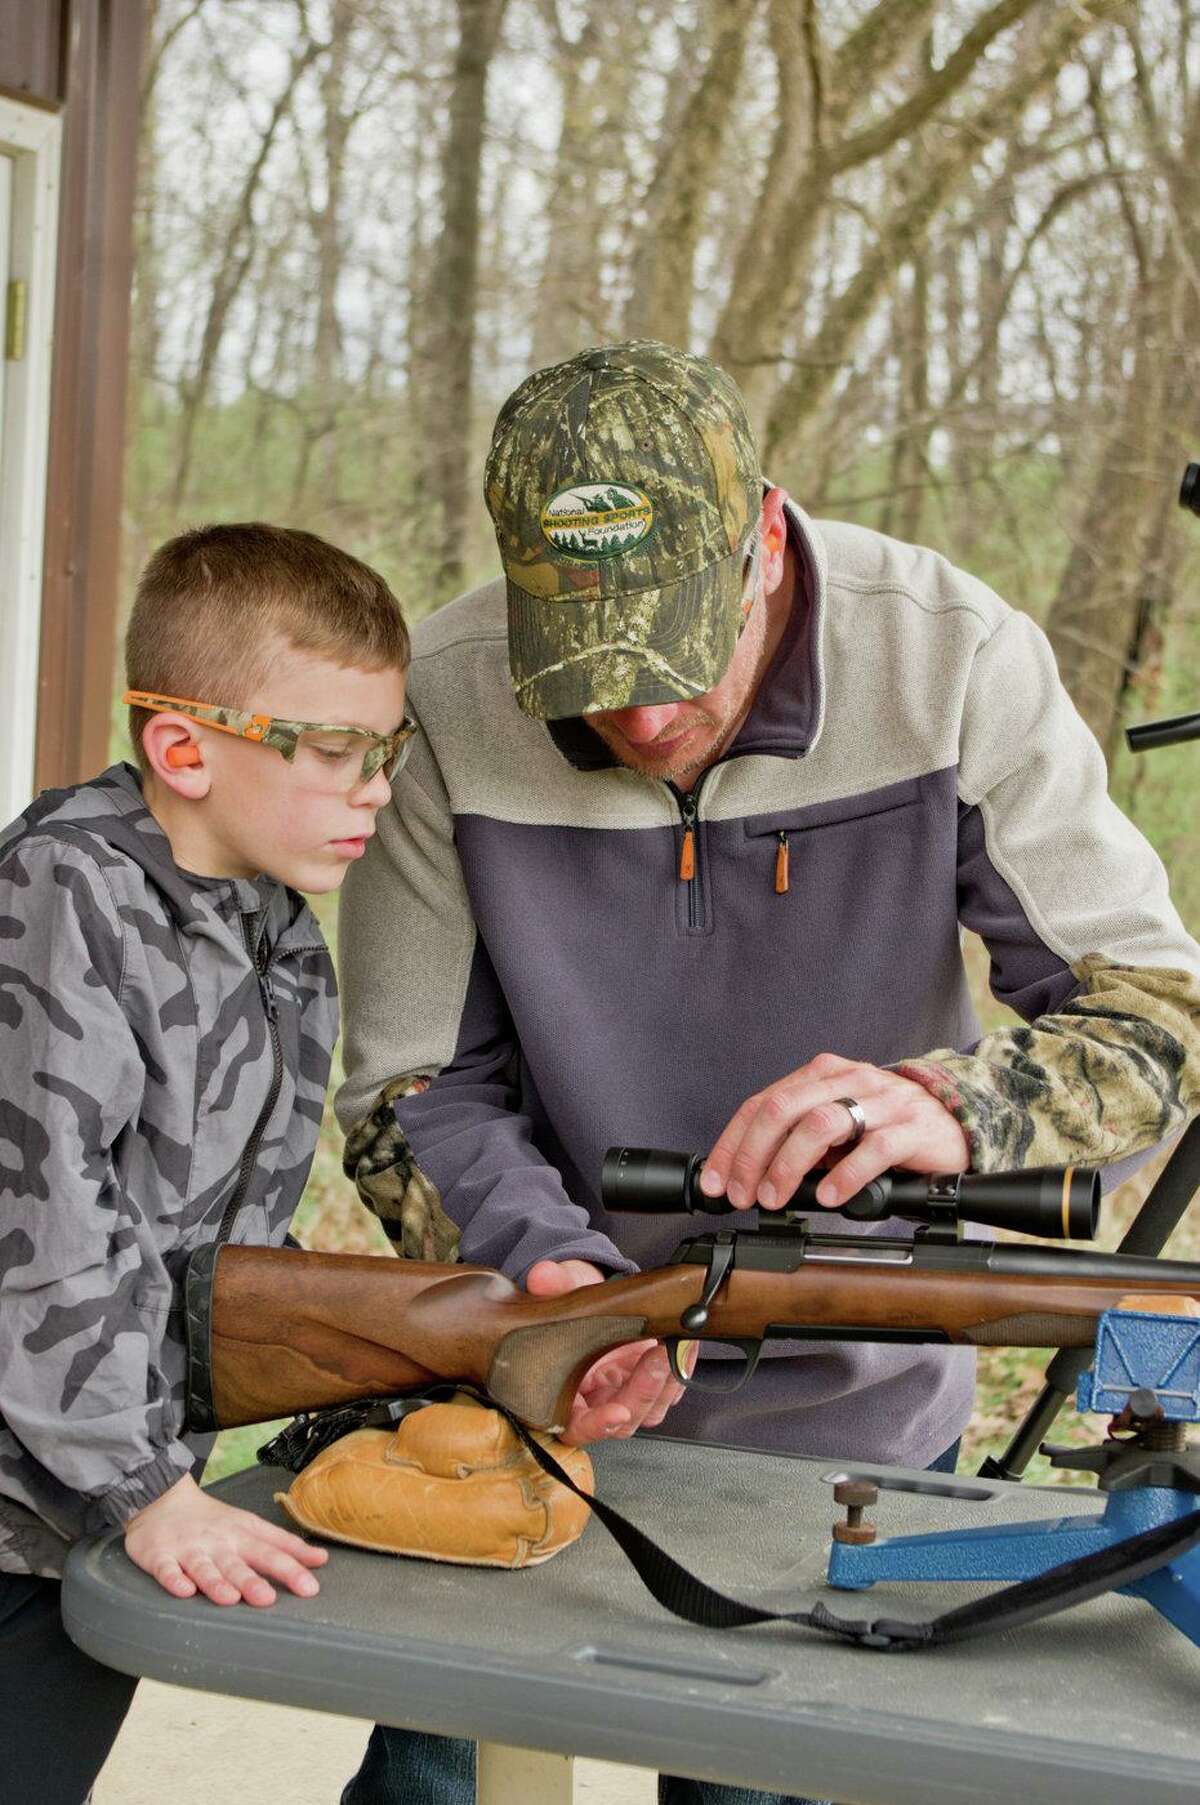 Youth seasons must start with proper safety and firearm training.